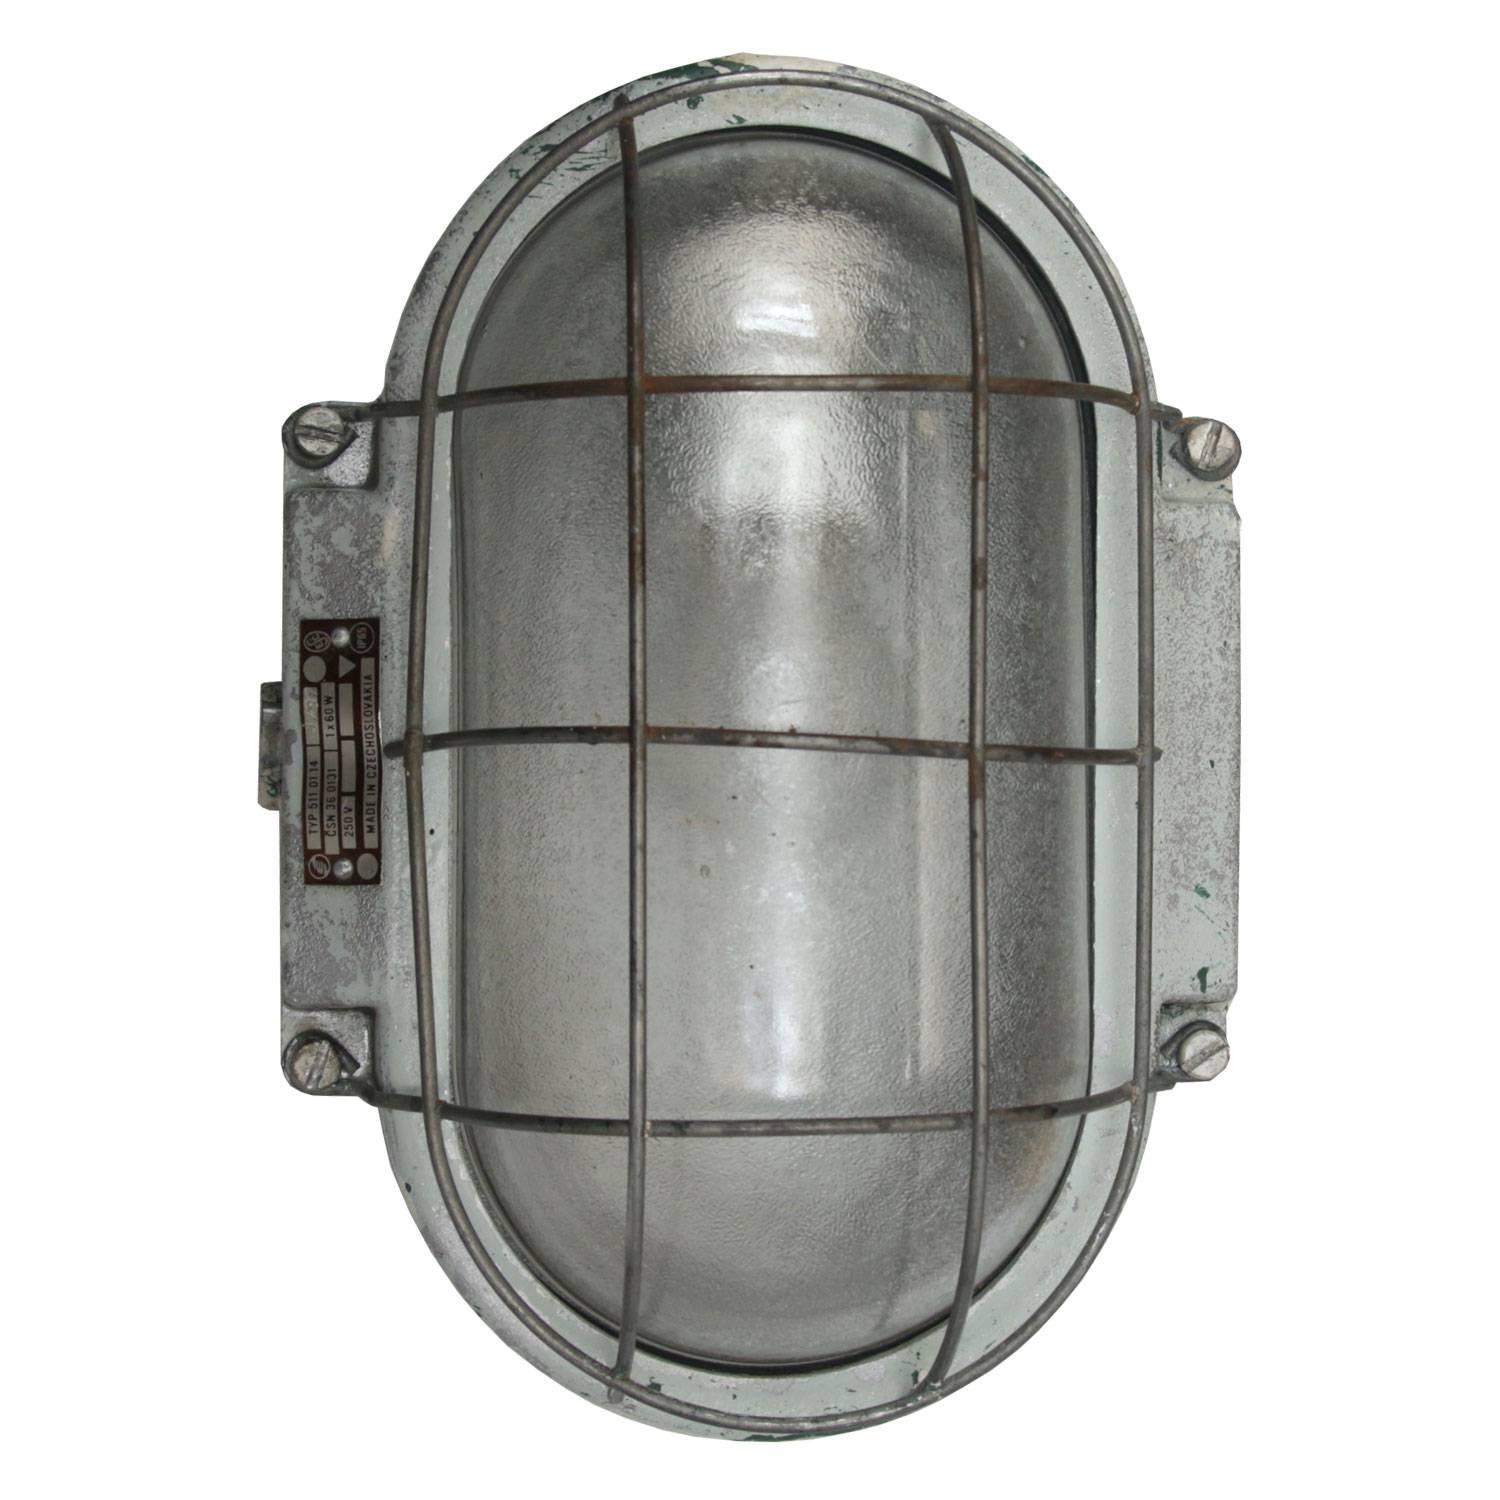 Vlasim semi raw. Industrial wall or ceiling lamp. Cast aluminium. Frosted glass.

Measures: Weight: 2.0 kg / 4.4 lb

All lamps have been made suitable by international standards for incandescent light bulbs, energy-efficient and LED bulbs.